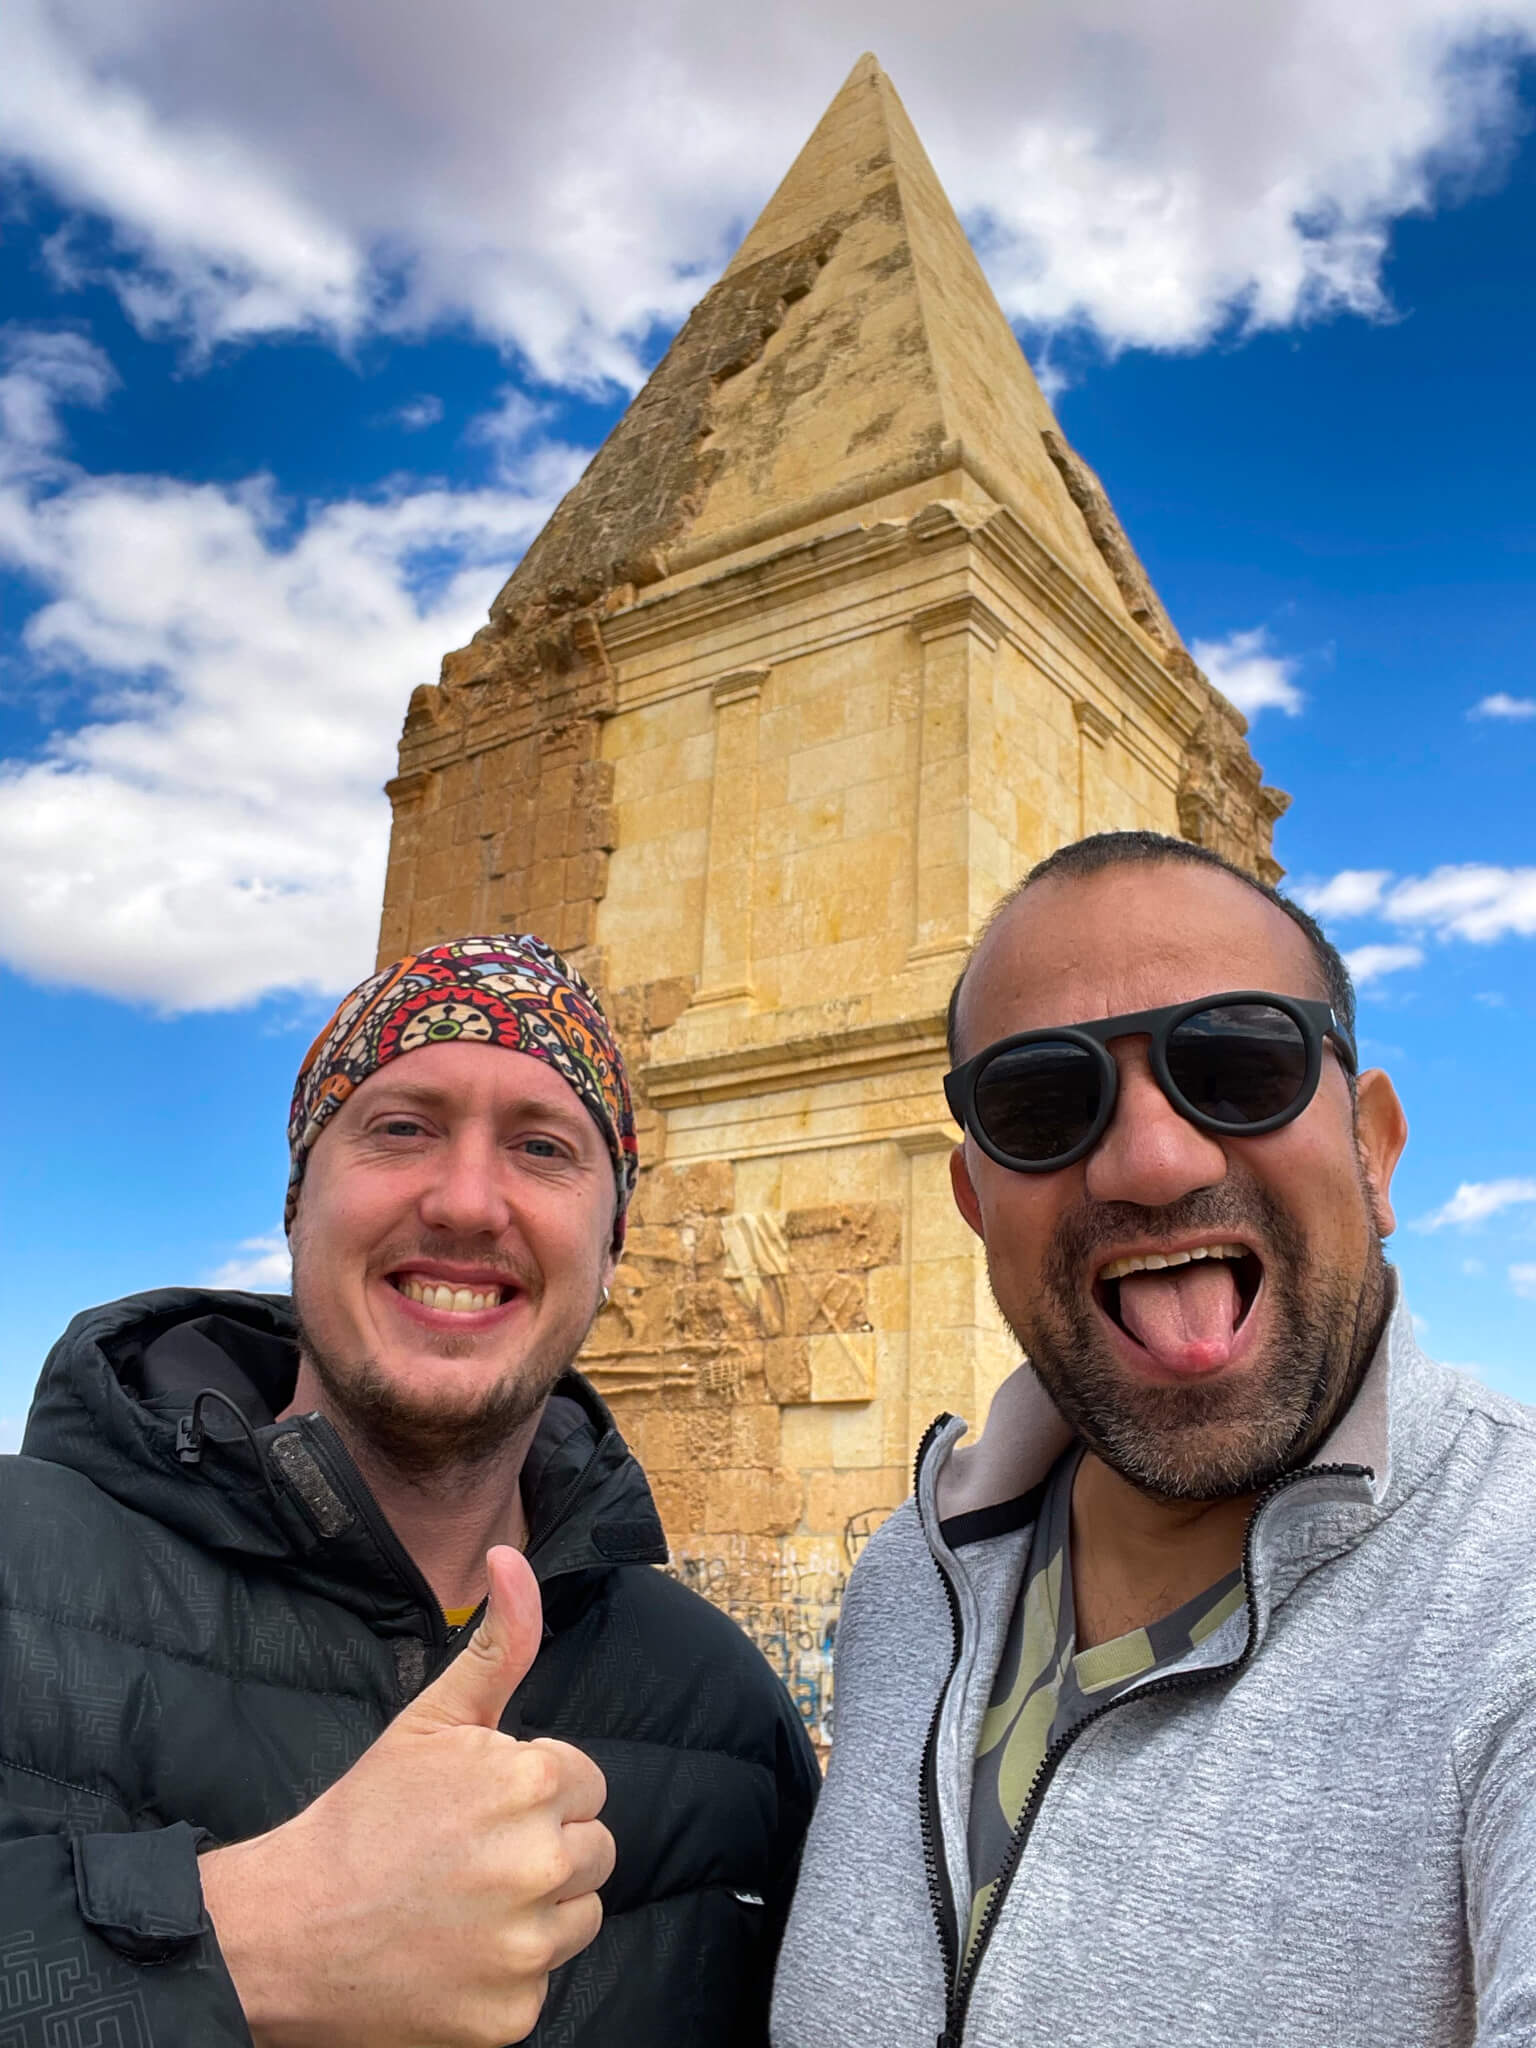 Me and a friend in front of the Pyramid of Hermel